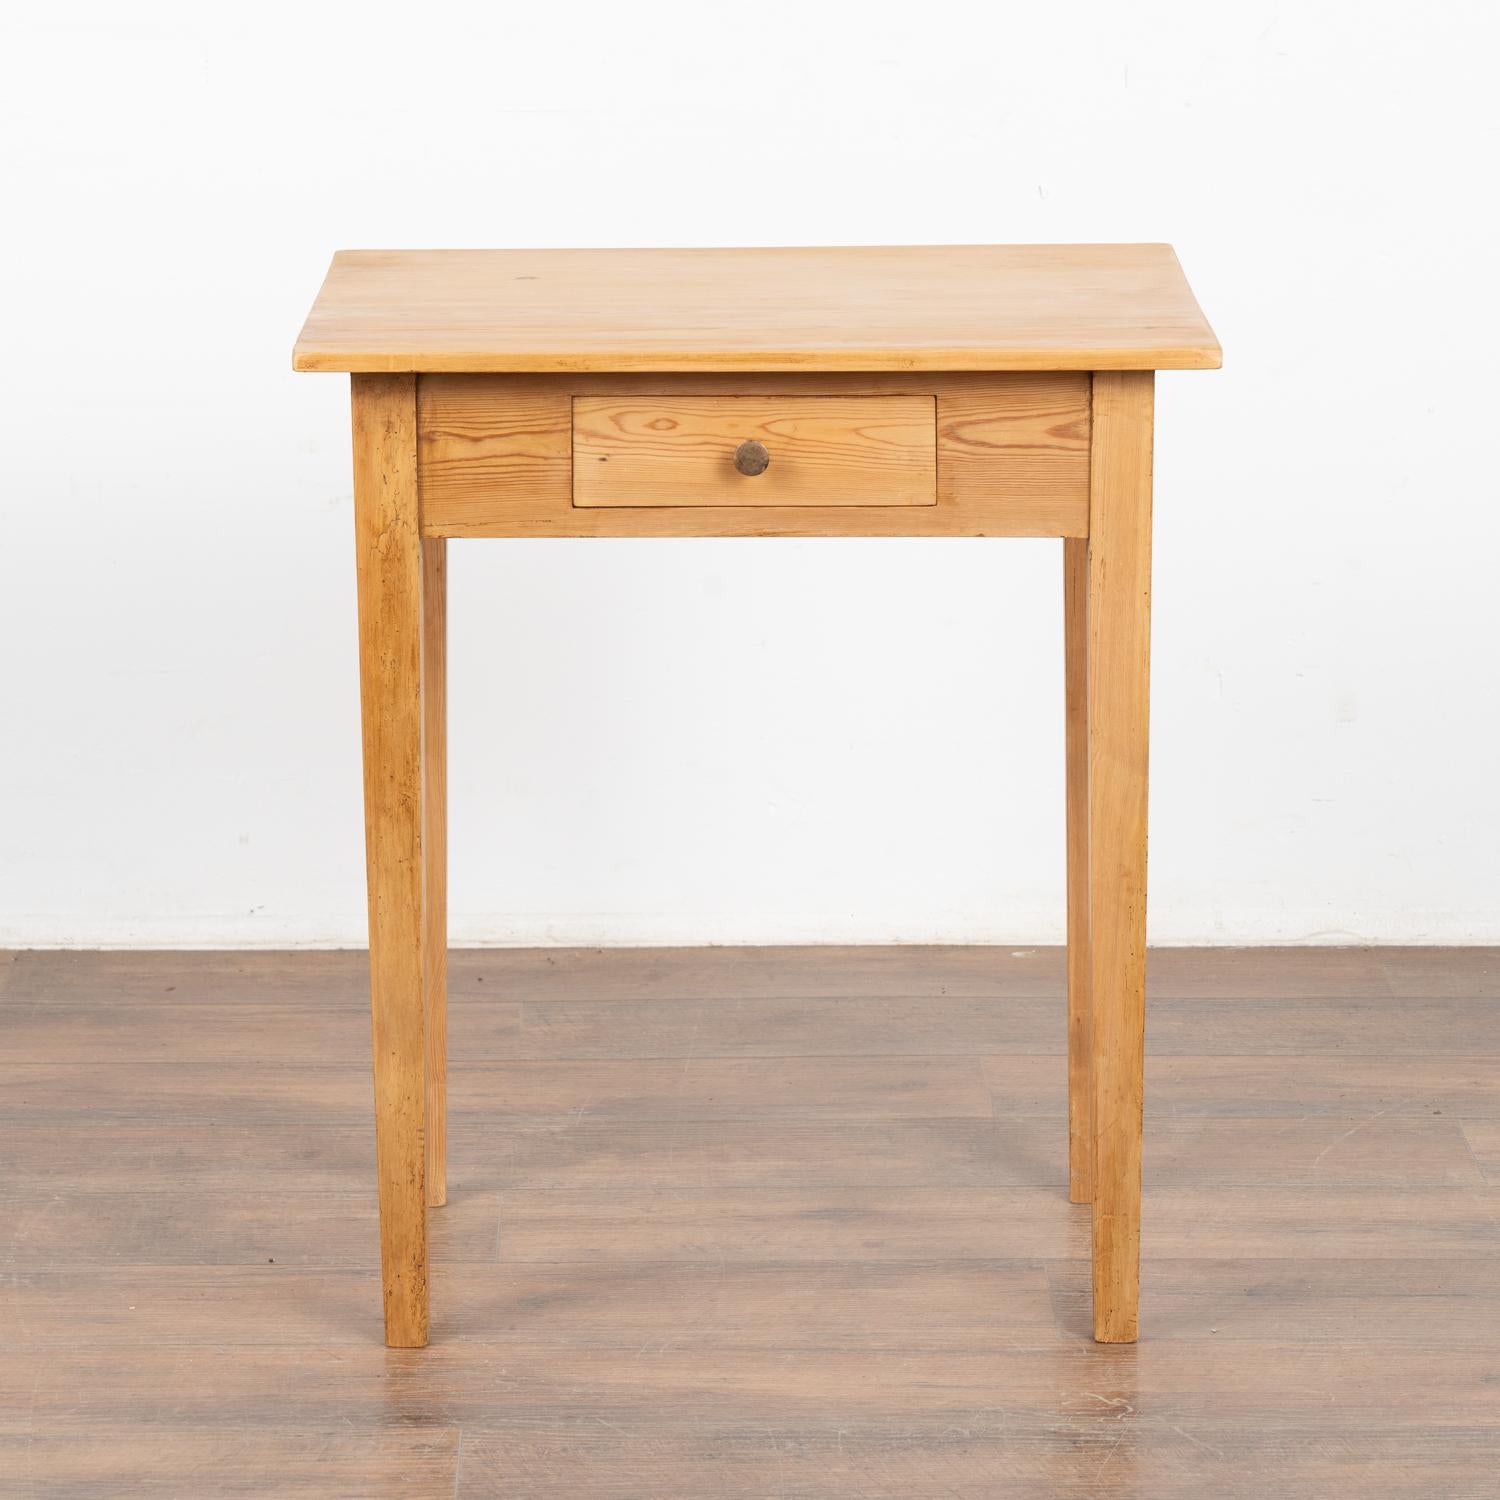 Danish Small Pine Side Table With Tapered Legs, Denmark circa 1900's For Sale